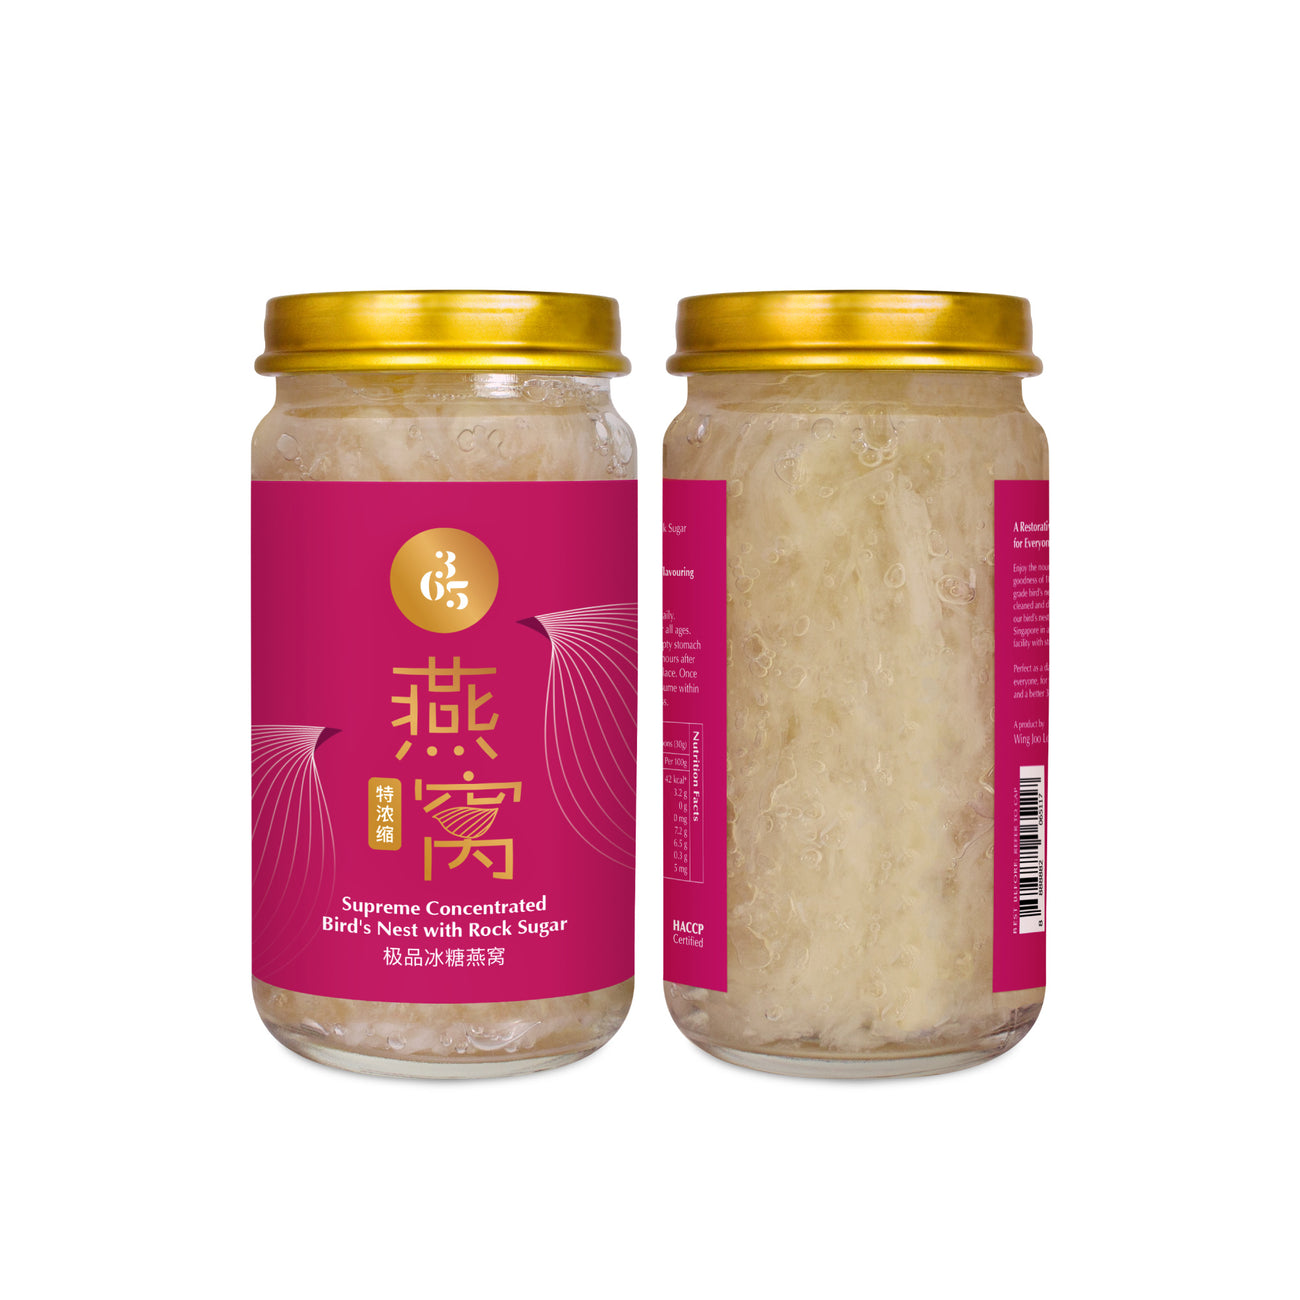 Supreme Concentrated Bird's Nest with Rock Sugar 150g 极品特浓缩燕窝